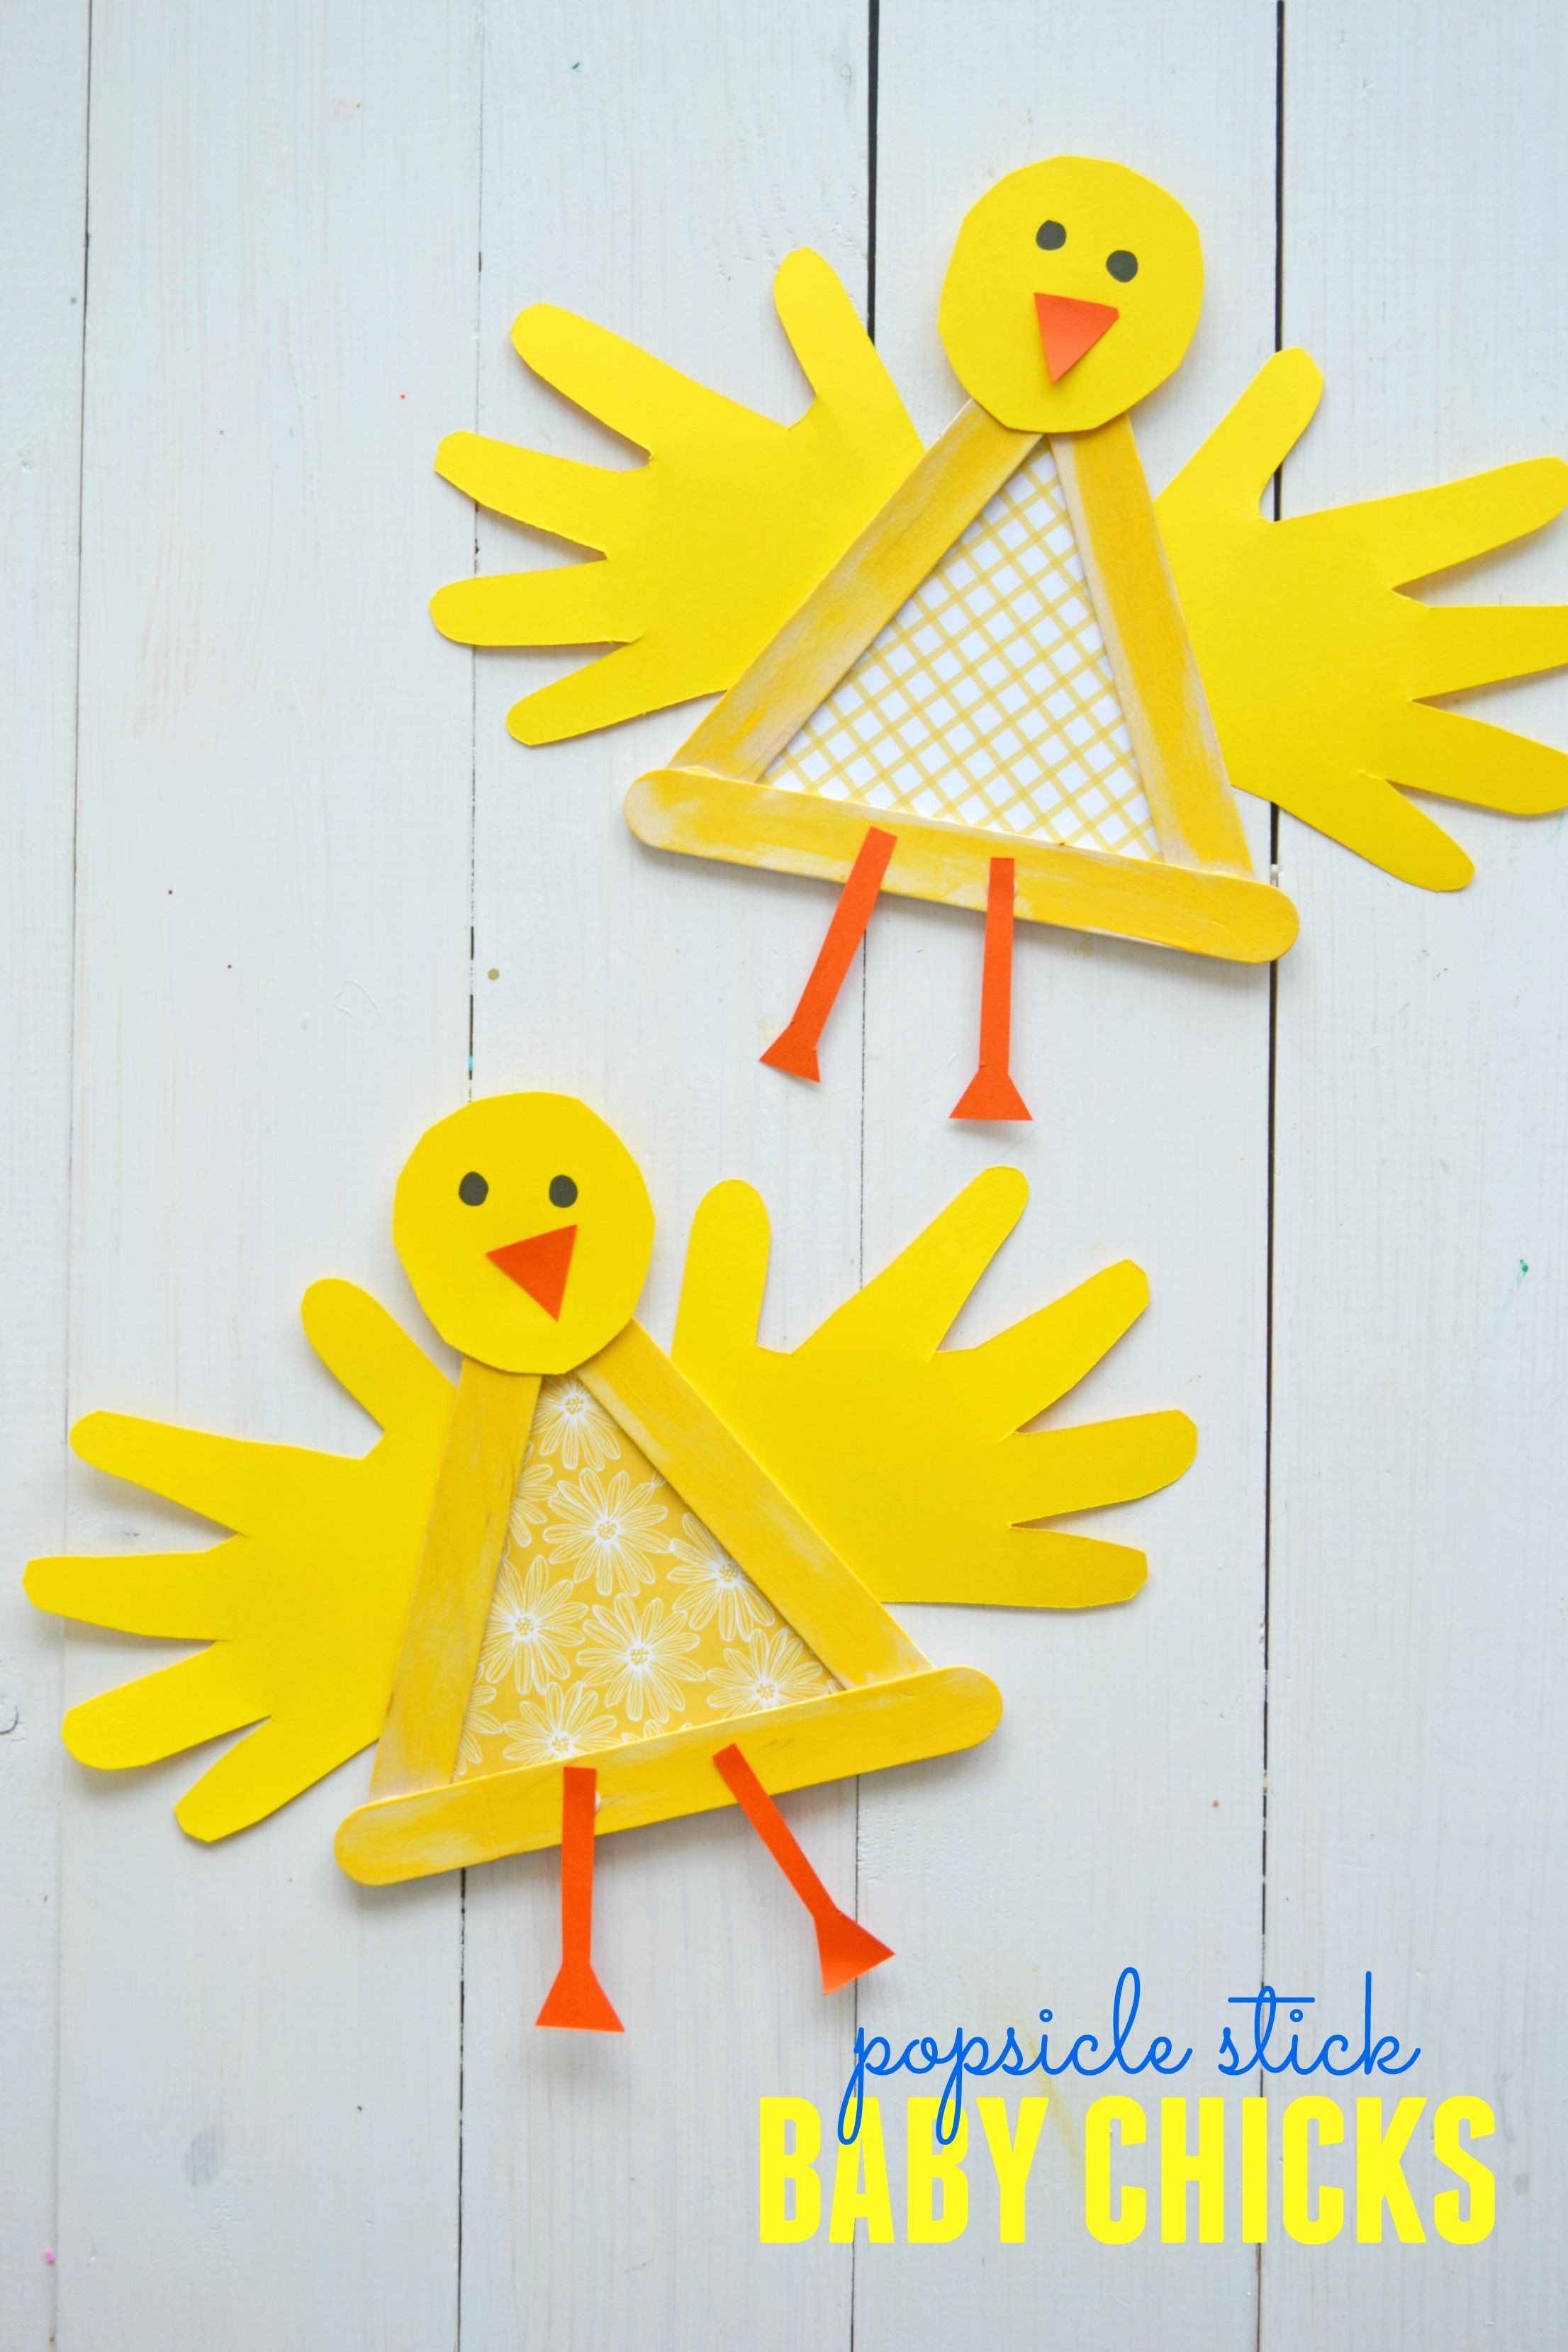 Papercraft Ideas for Kids Crafty Popsicle Stick Baby Chick for Spring Ideas